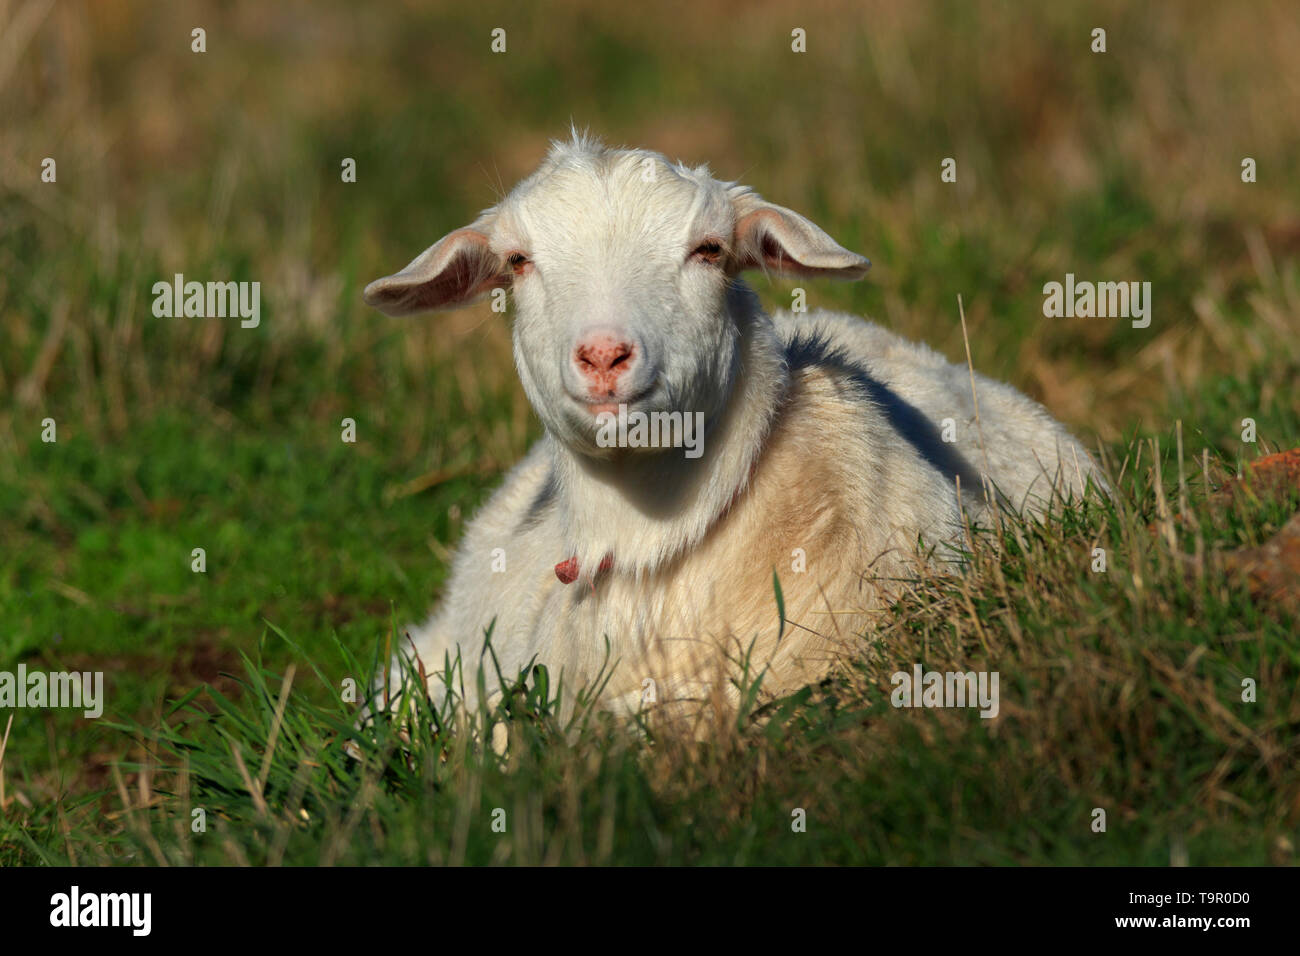 Cute young white domestic goat sitting in a green grass farm paddock. Stock Photo